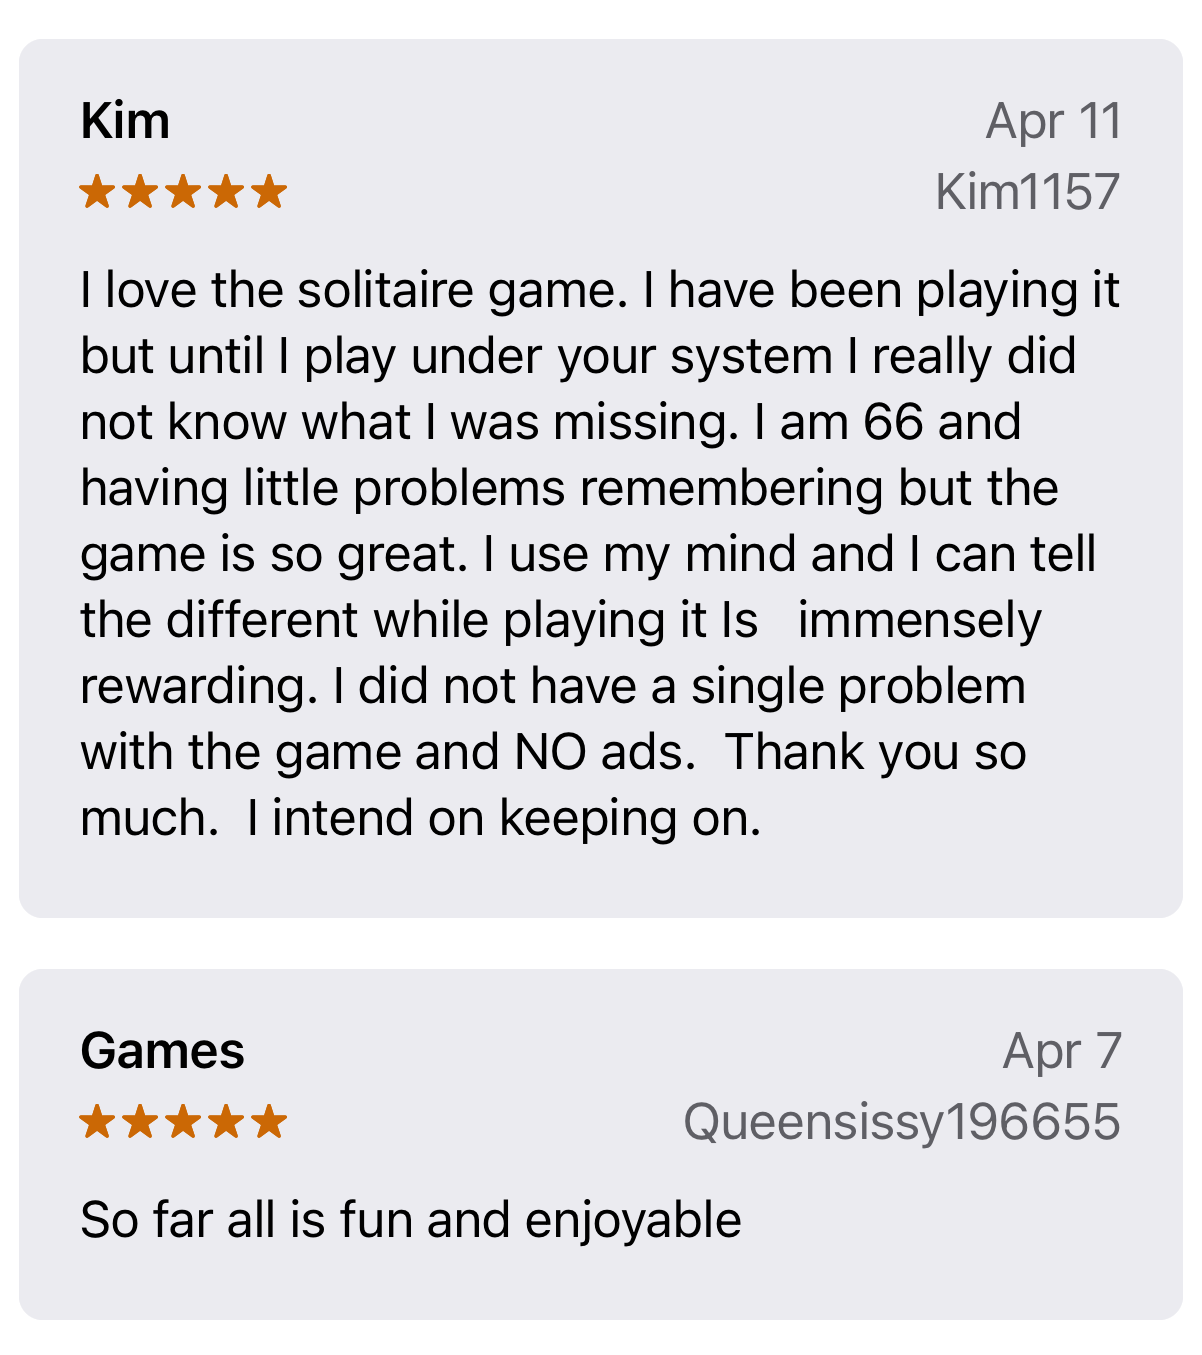 Two Apple App Store reviews from Test'em All users who enjoy playing with no ads. and find the games fun. 